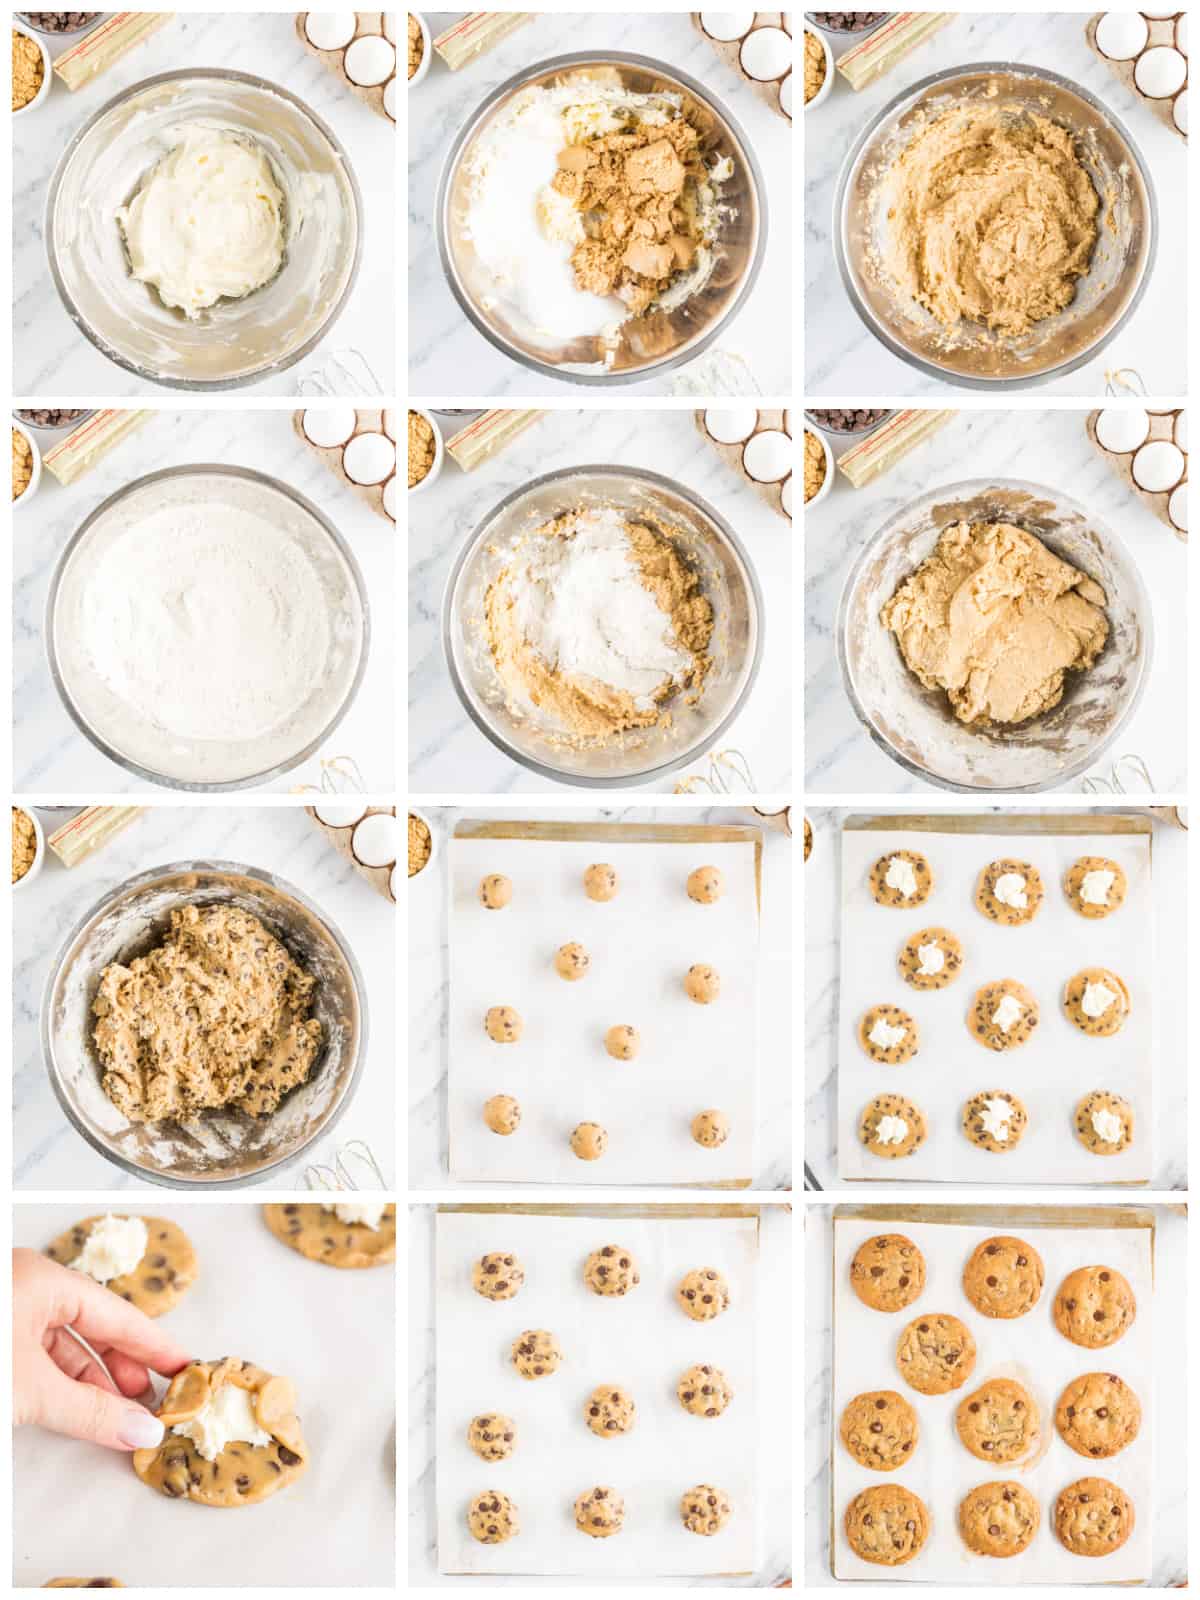 Step by step photos on how to make Cheesecake Stuffed Chocolate Chip Cookies.